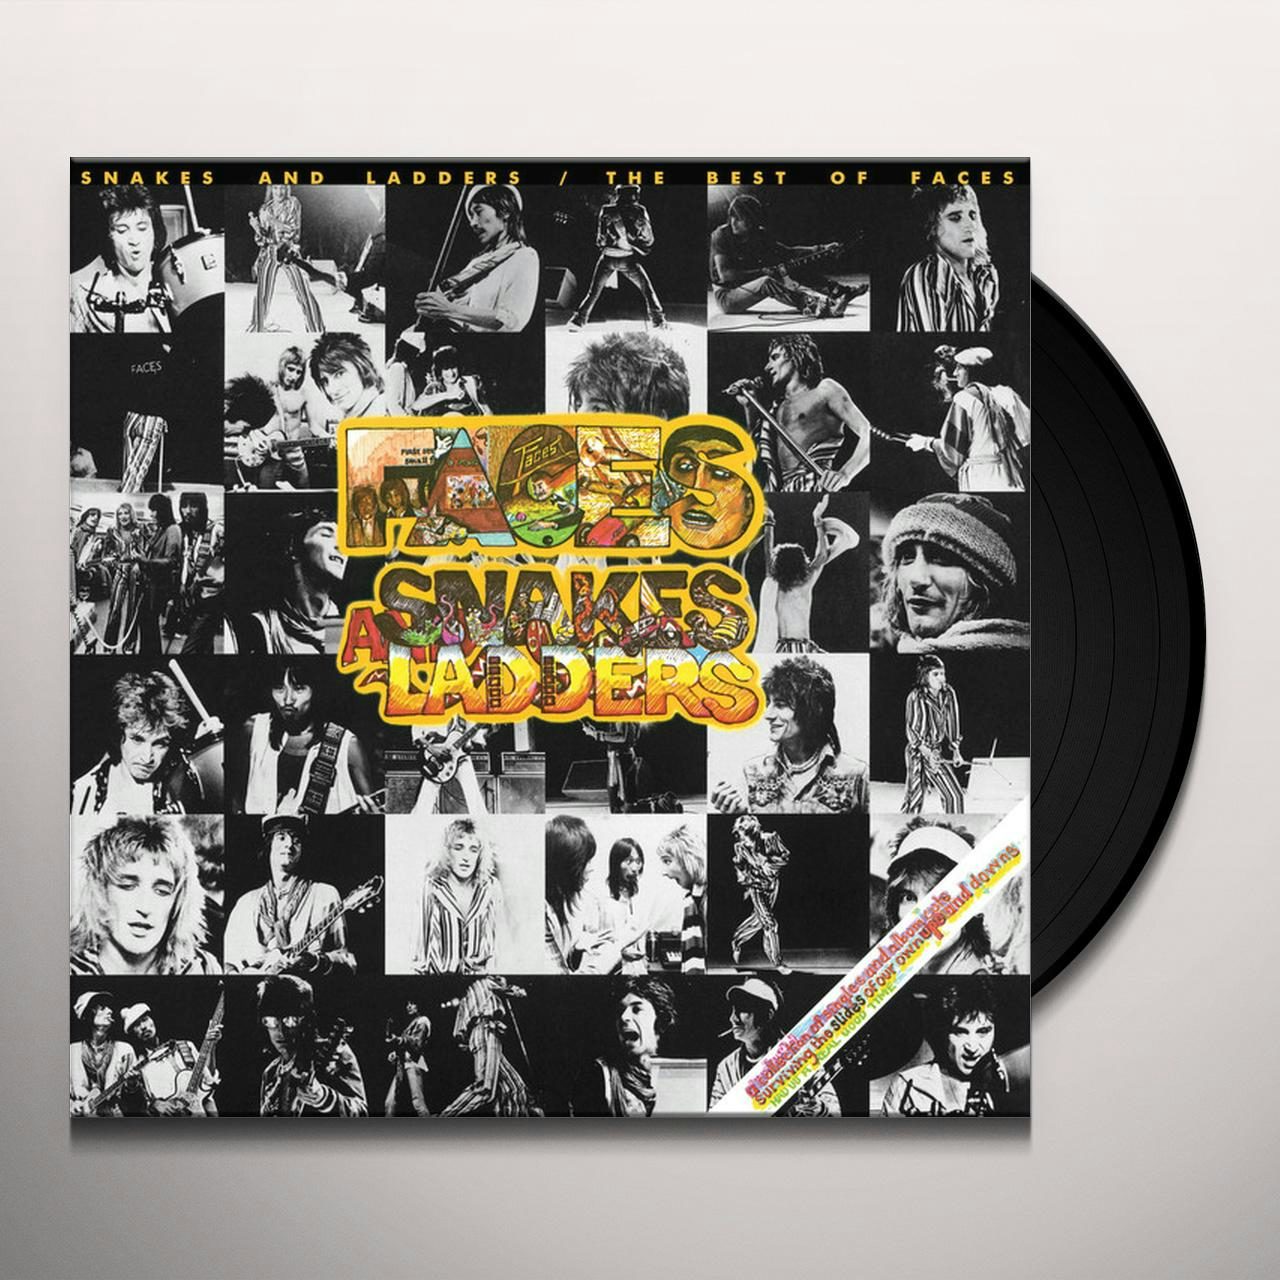 Snakes And Ladders: The Best Of Faces Vinyl Record